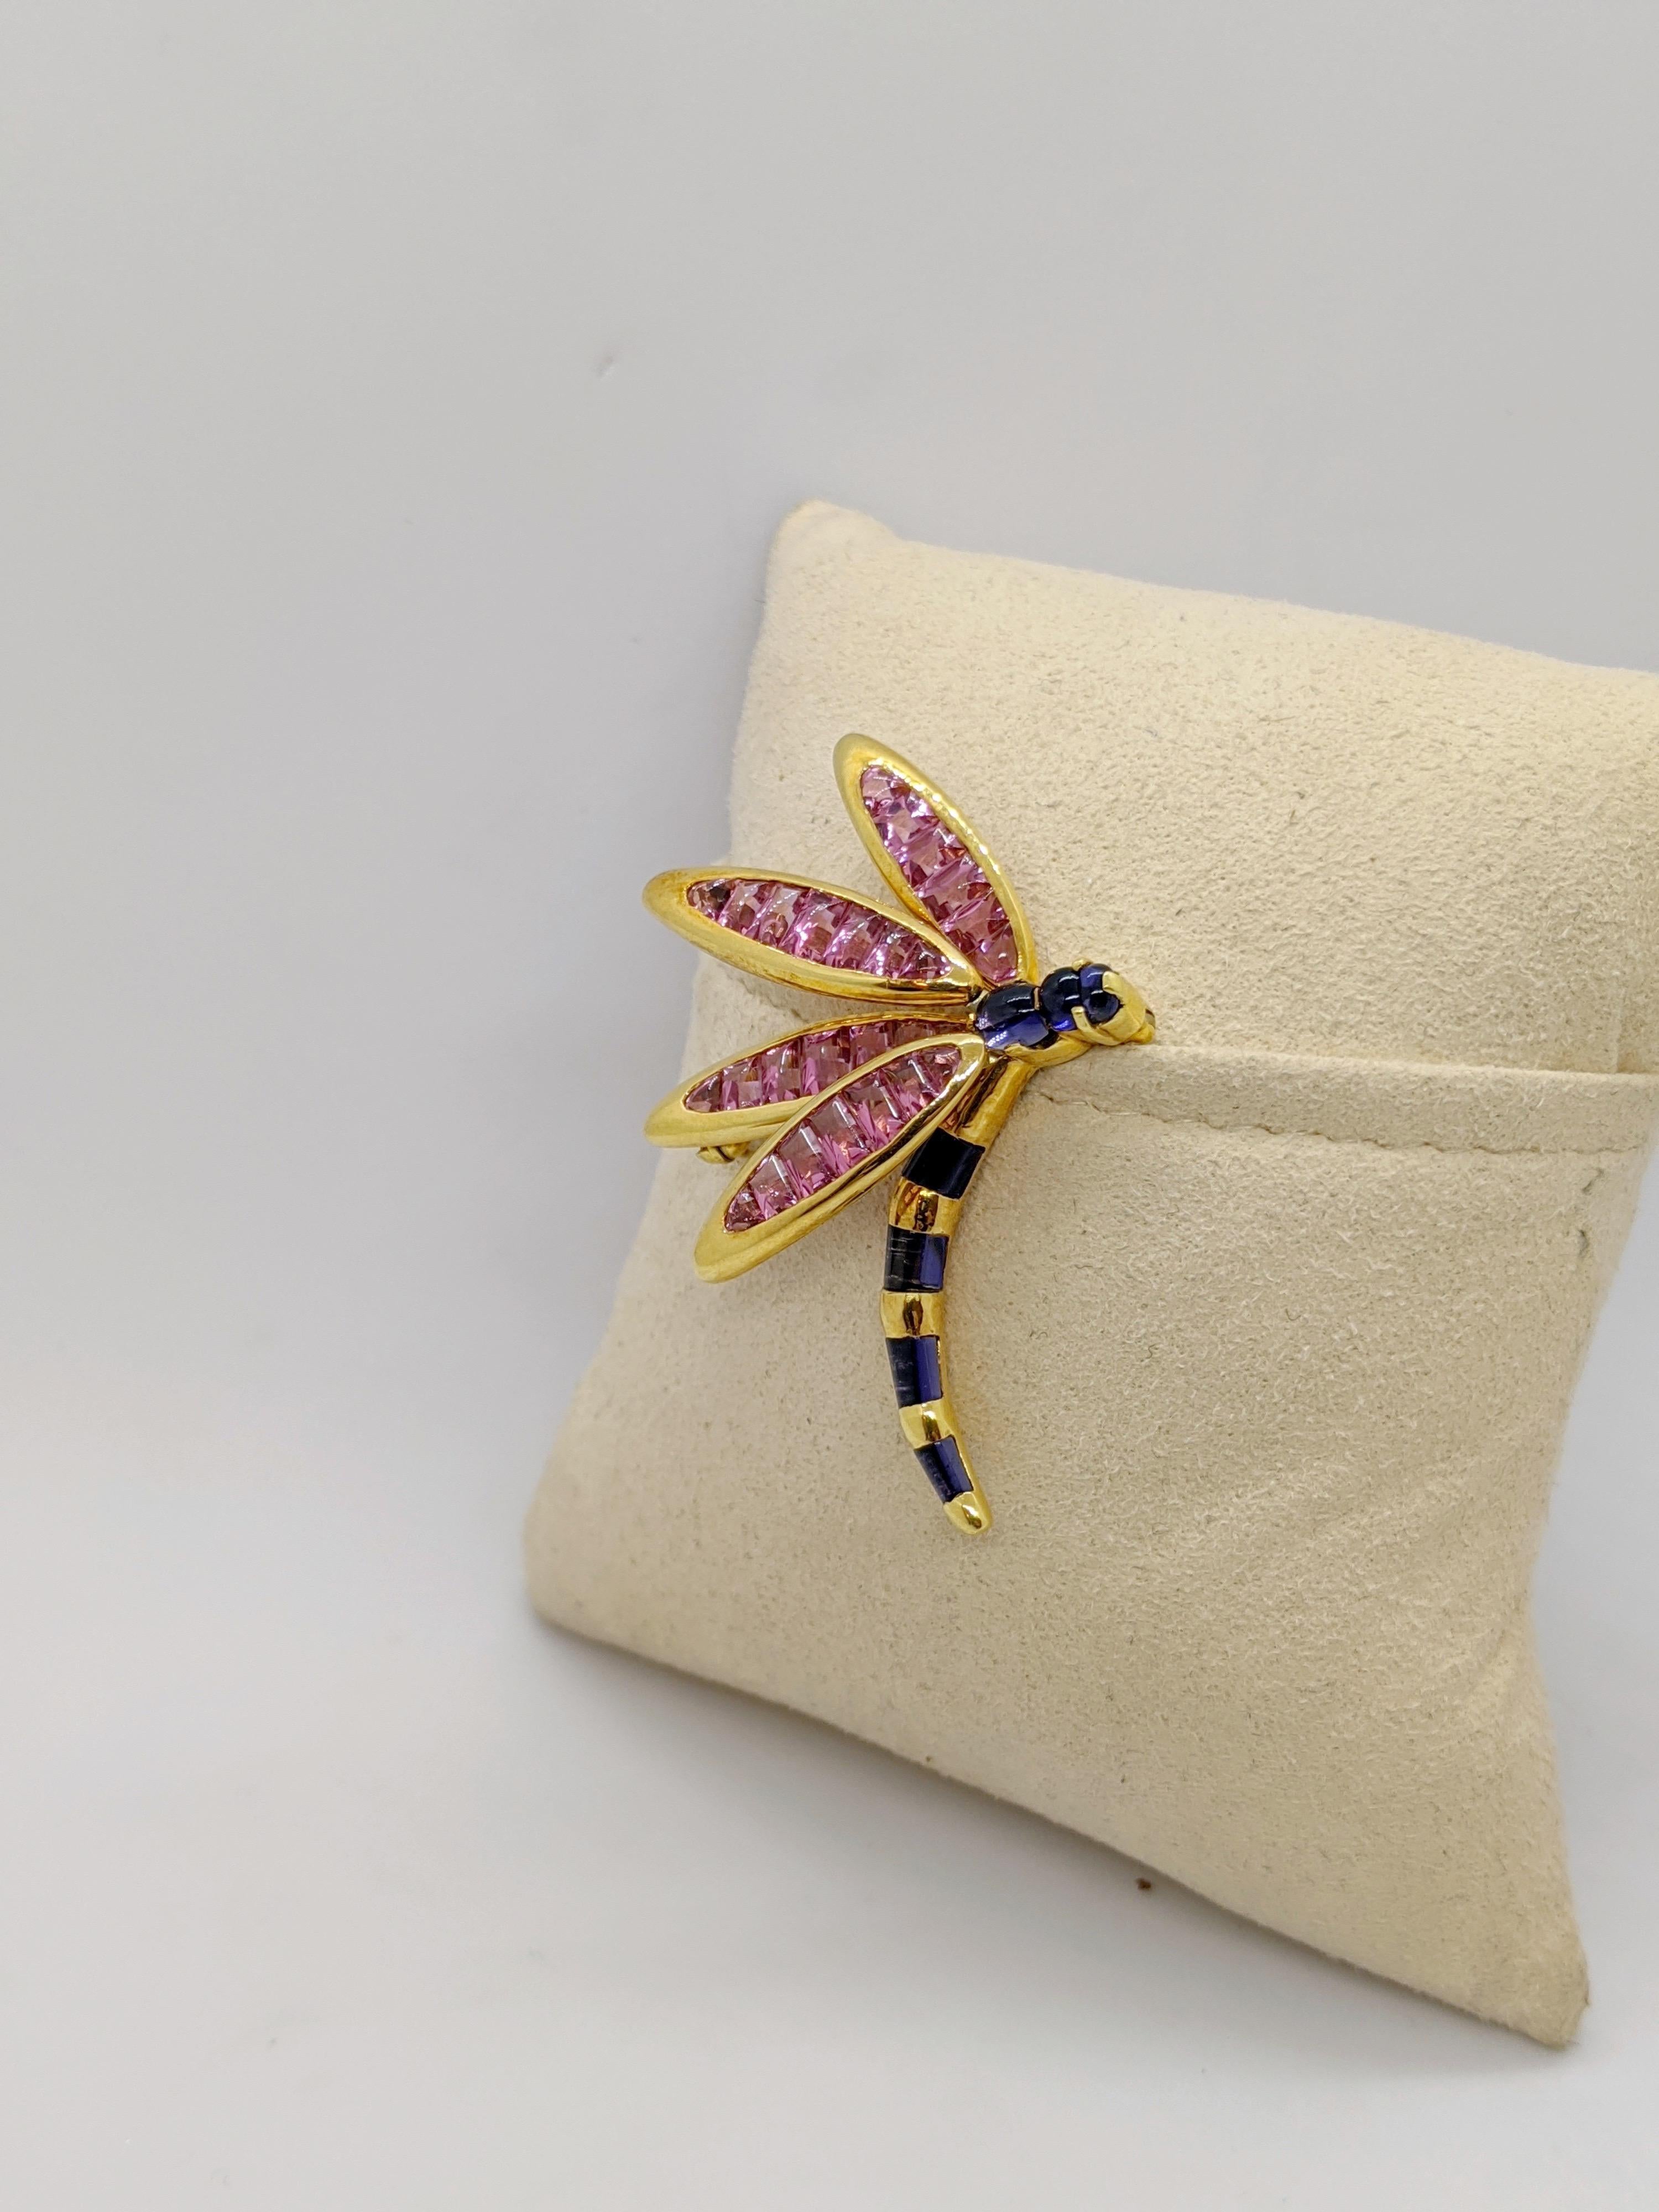 18 karat yellow gold Dragonfly brooch is set with Pink Tourmaline Baguette stones in the four wings and Iolite stones as the body. Two of the wings are able to flutter. The brooch measures approximately 2